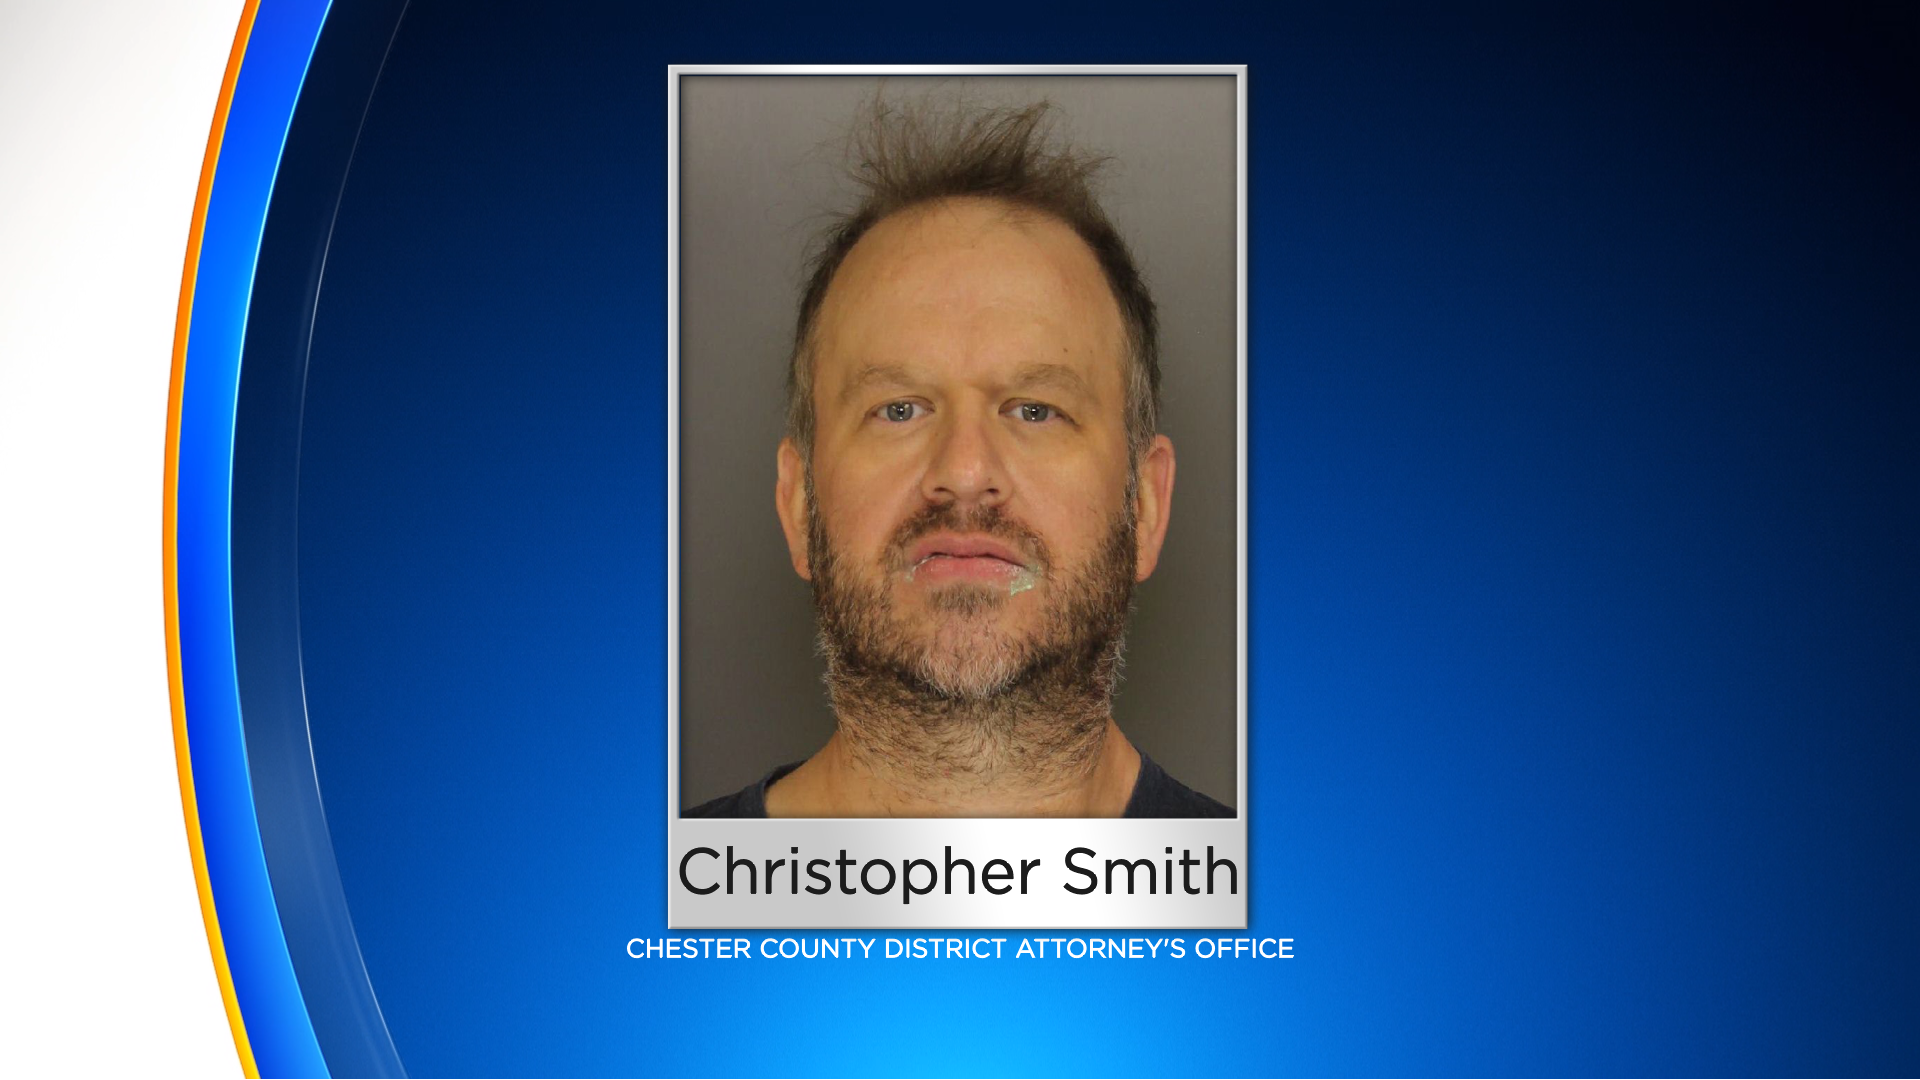 Exton Man, Christopher Smith, Charged With Attempted Homicide After He Allegedly Shot At Police During Standoff, Officials Say